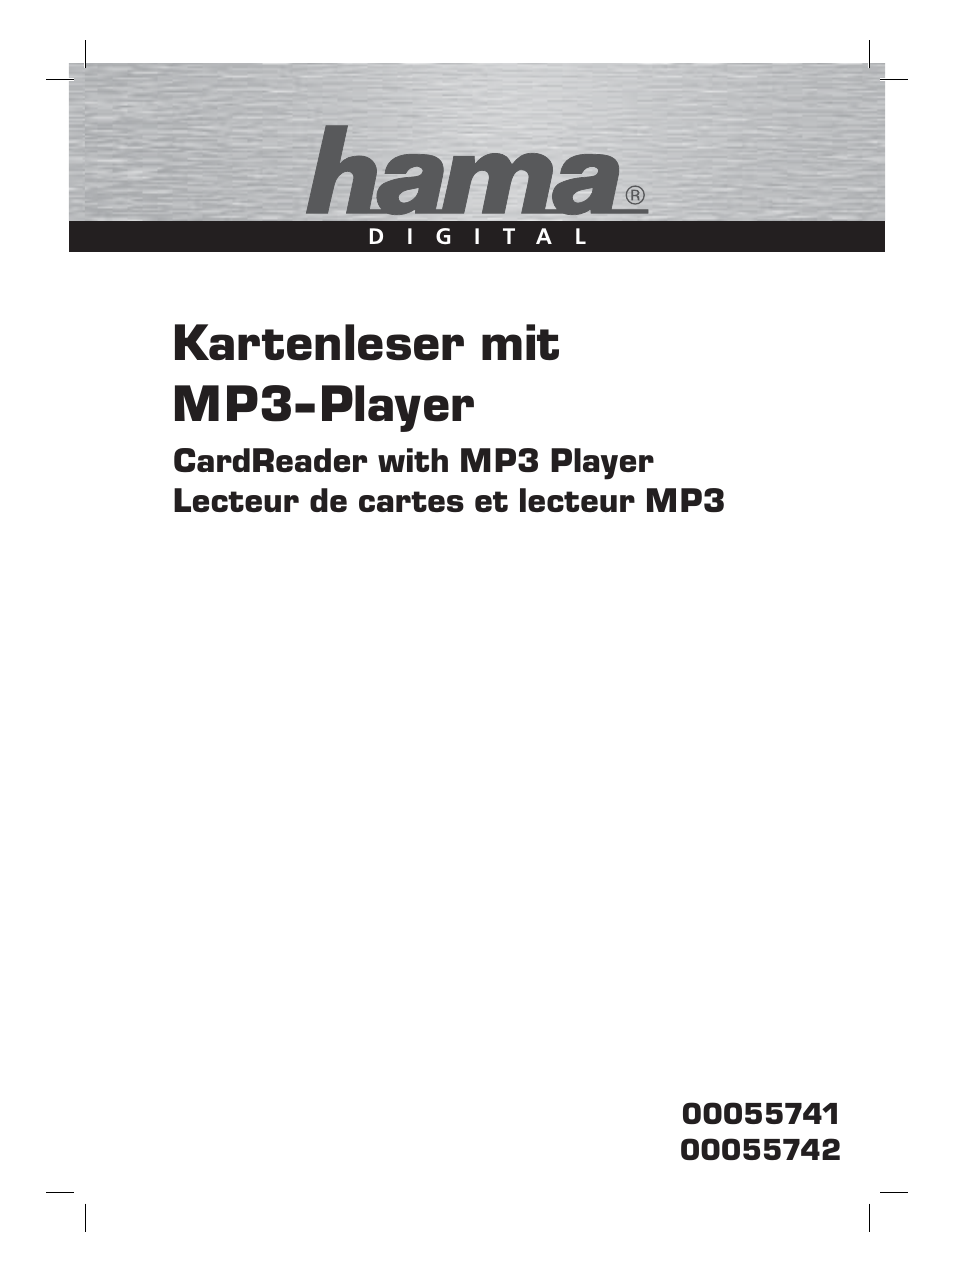 Kartenleser mit mp3-player | Hama Card Reader with MP3 Player User Manual |  Page 2 / 40